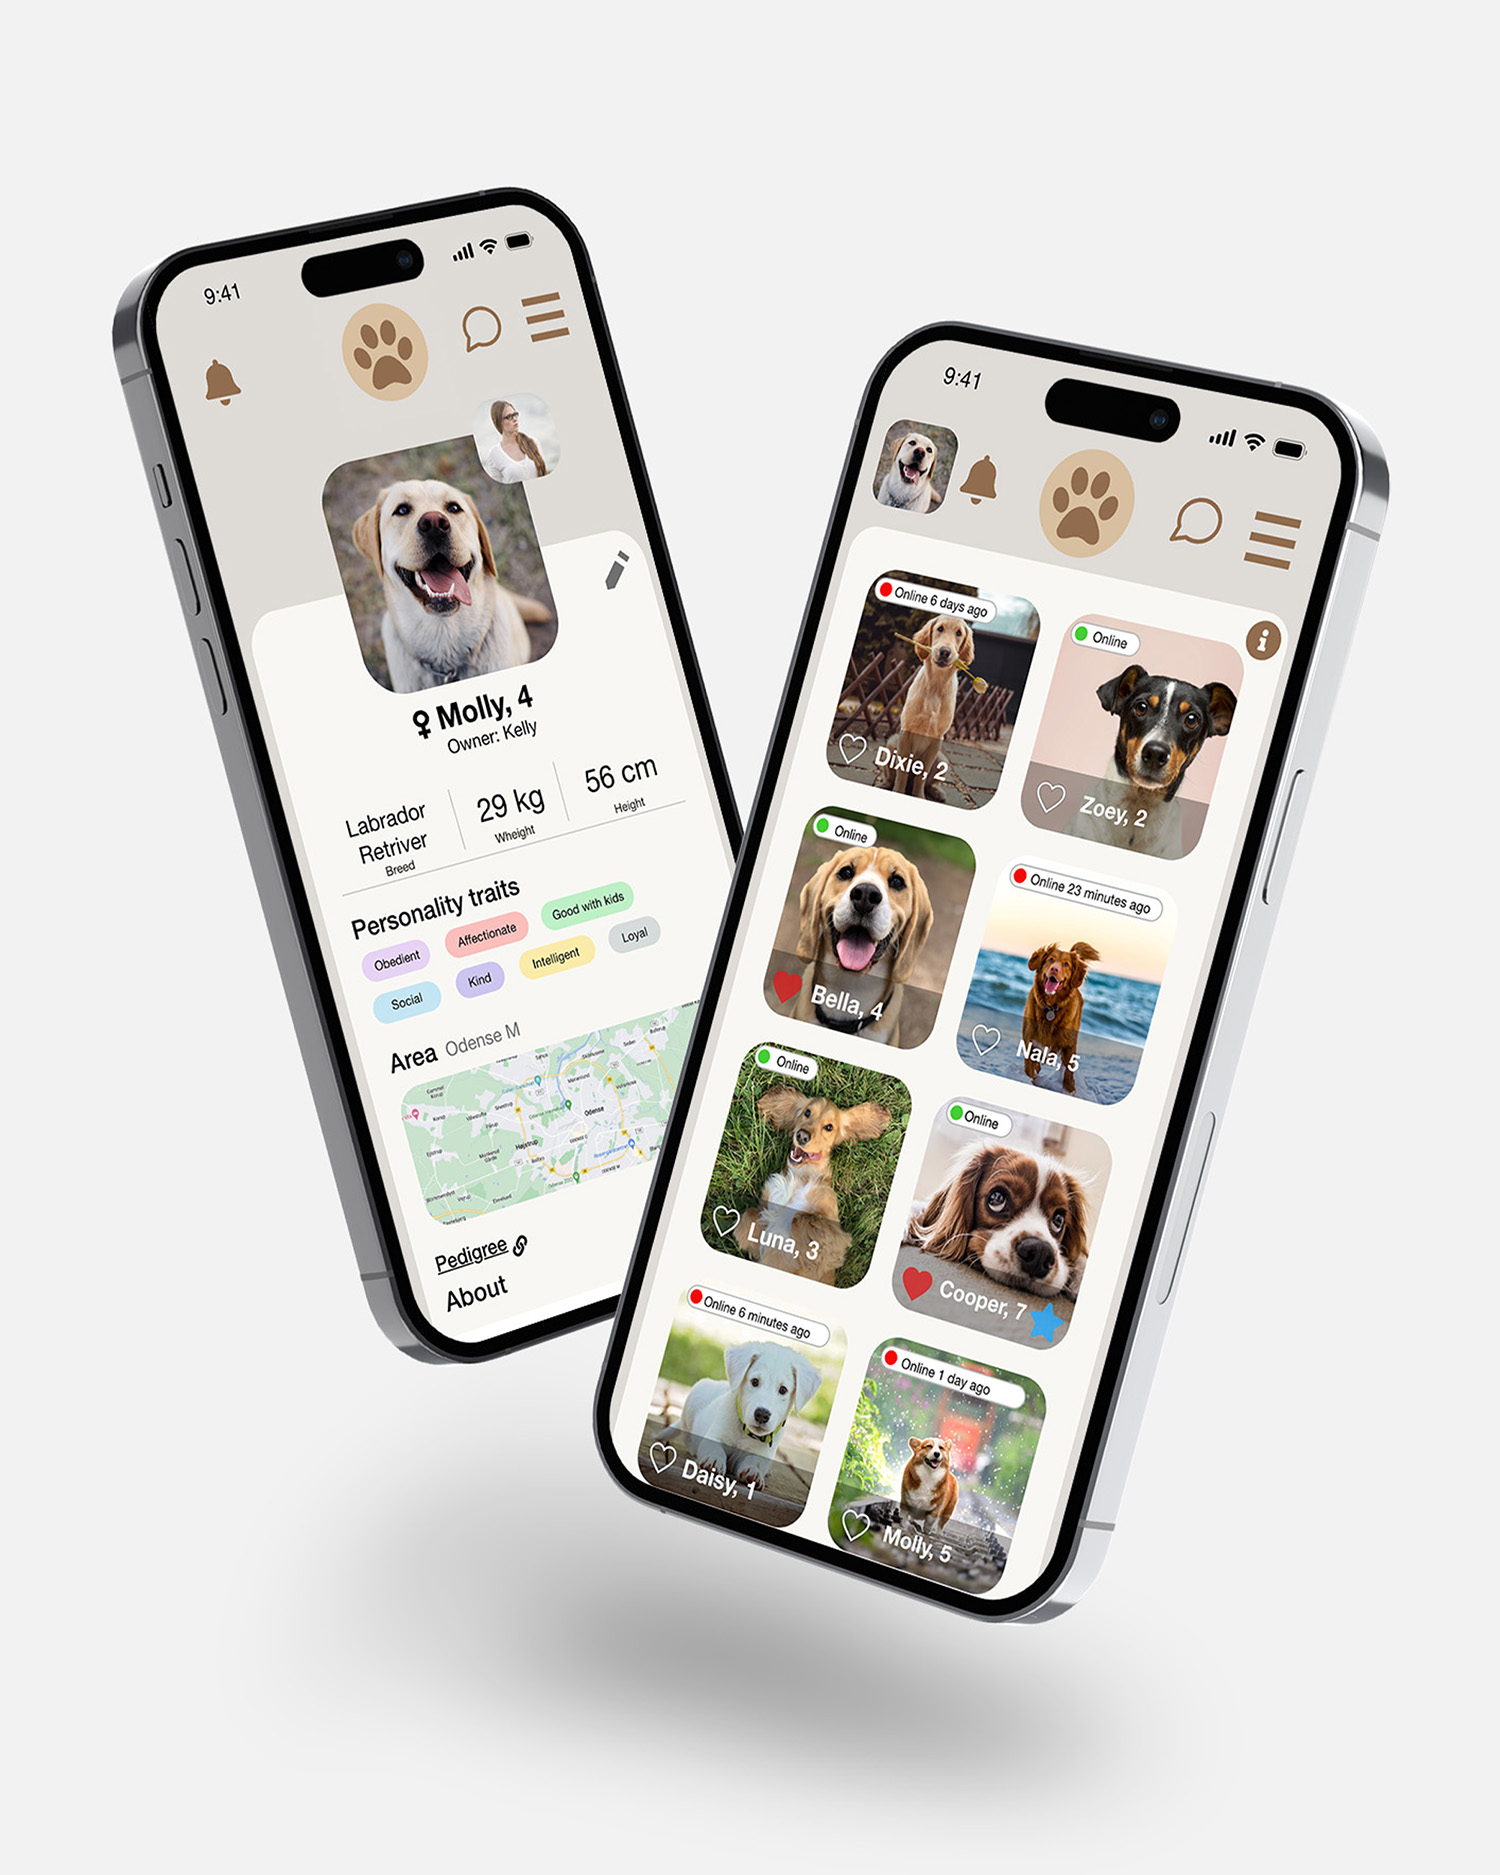 dating app for dogs on 2 iphones